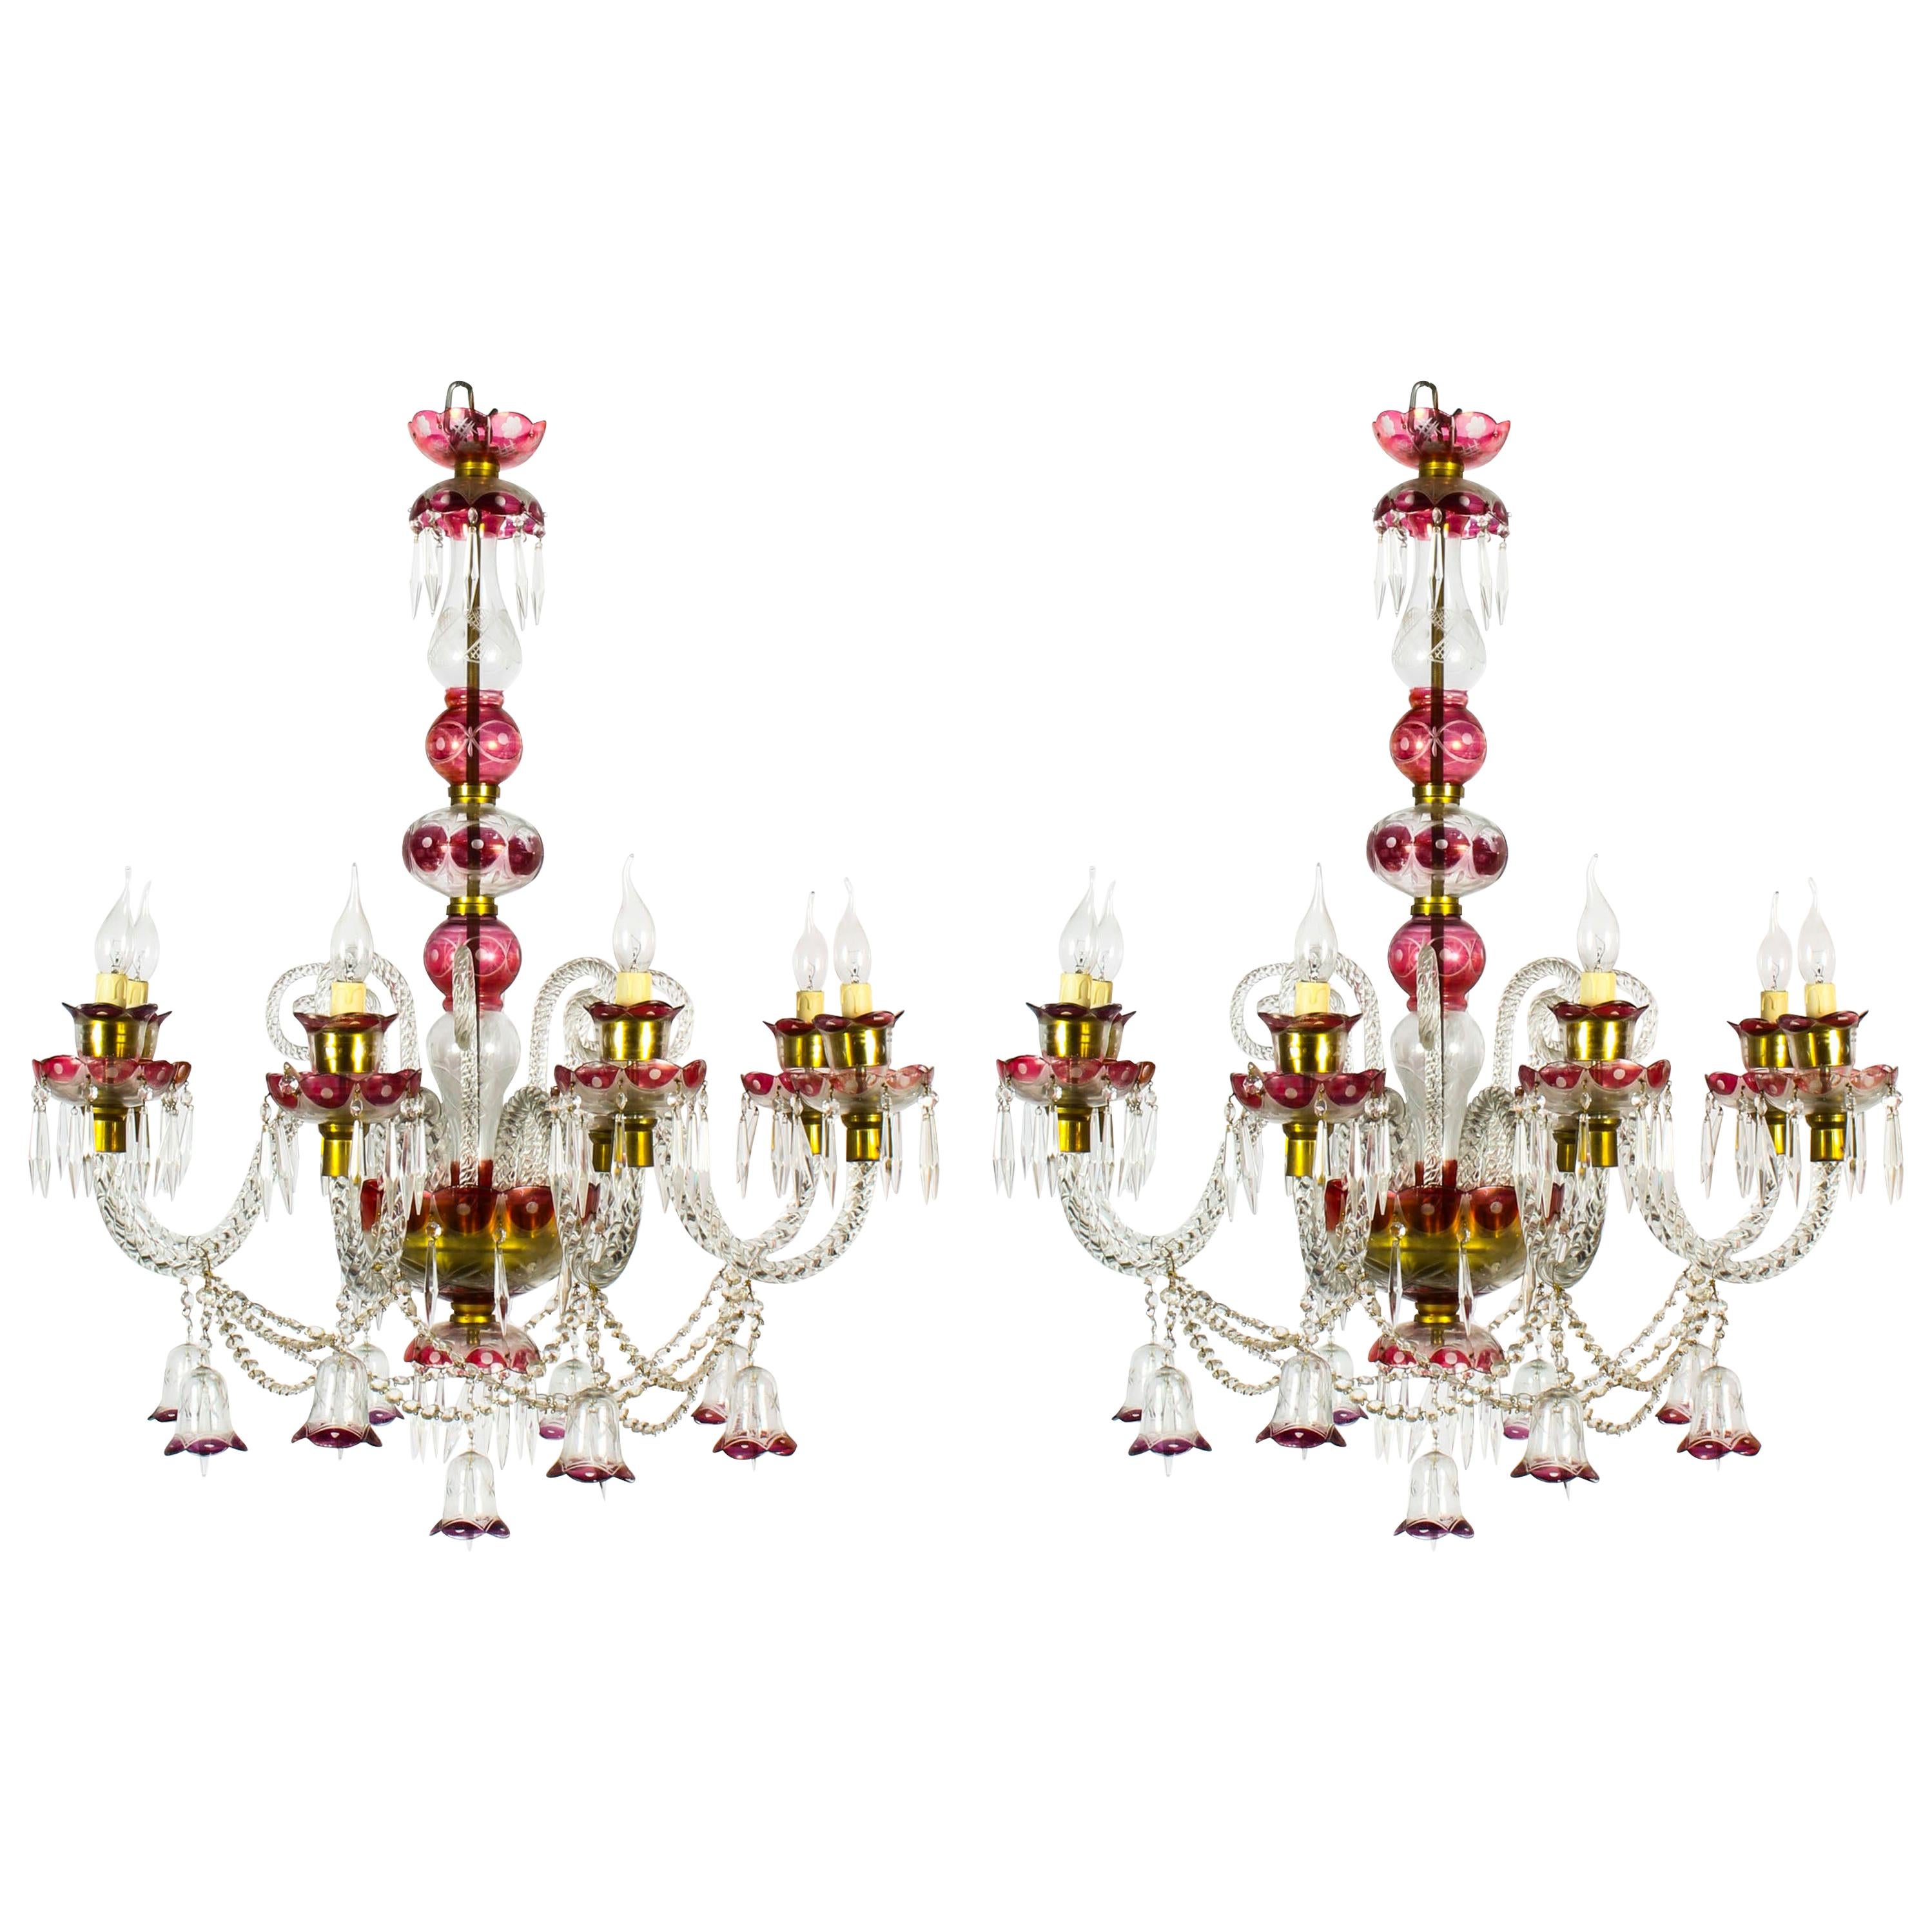 Pair of Venetian 8-Light Crystal Cranberry Chandeliers, Early 20th Century